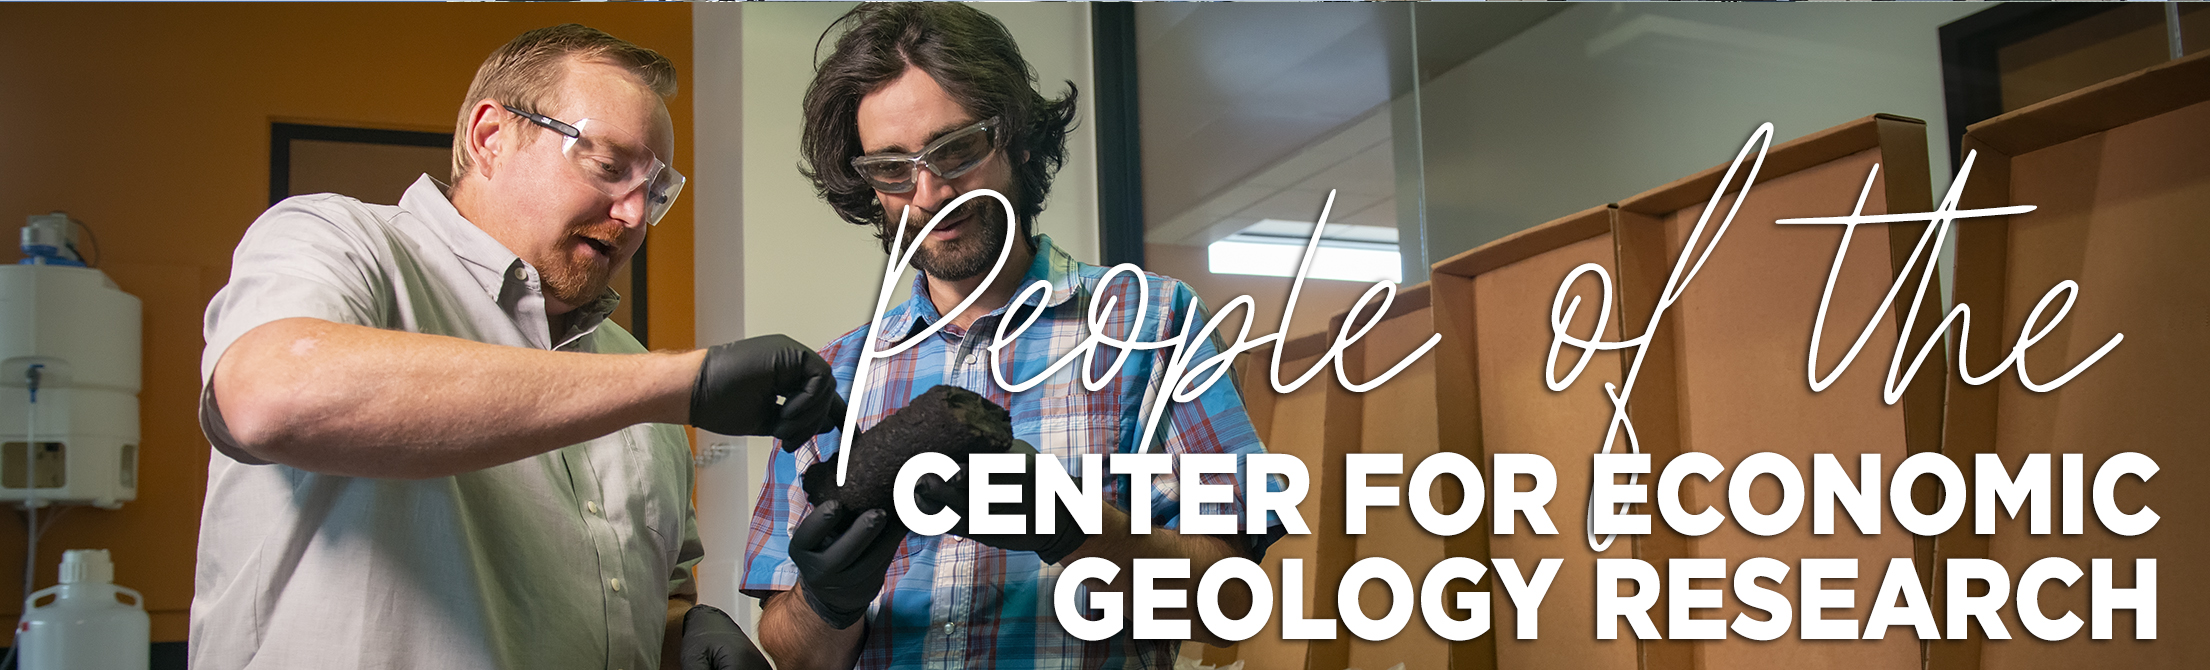 People at the Center for economic Geology Research